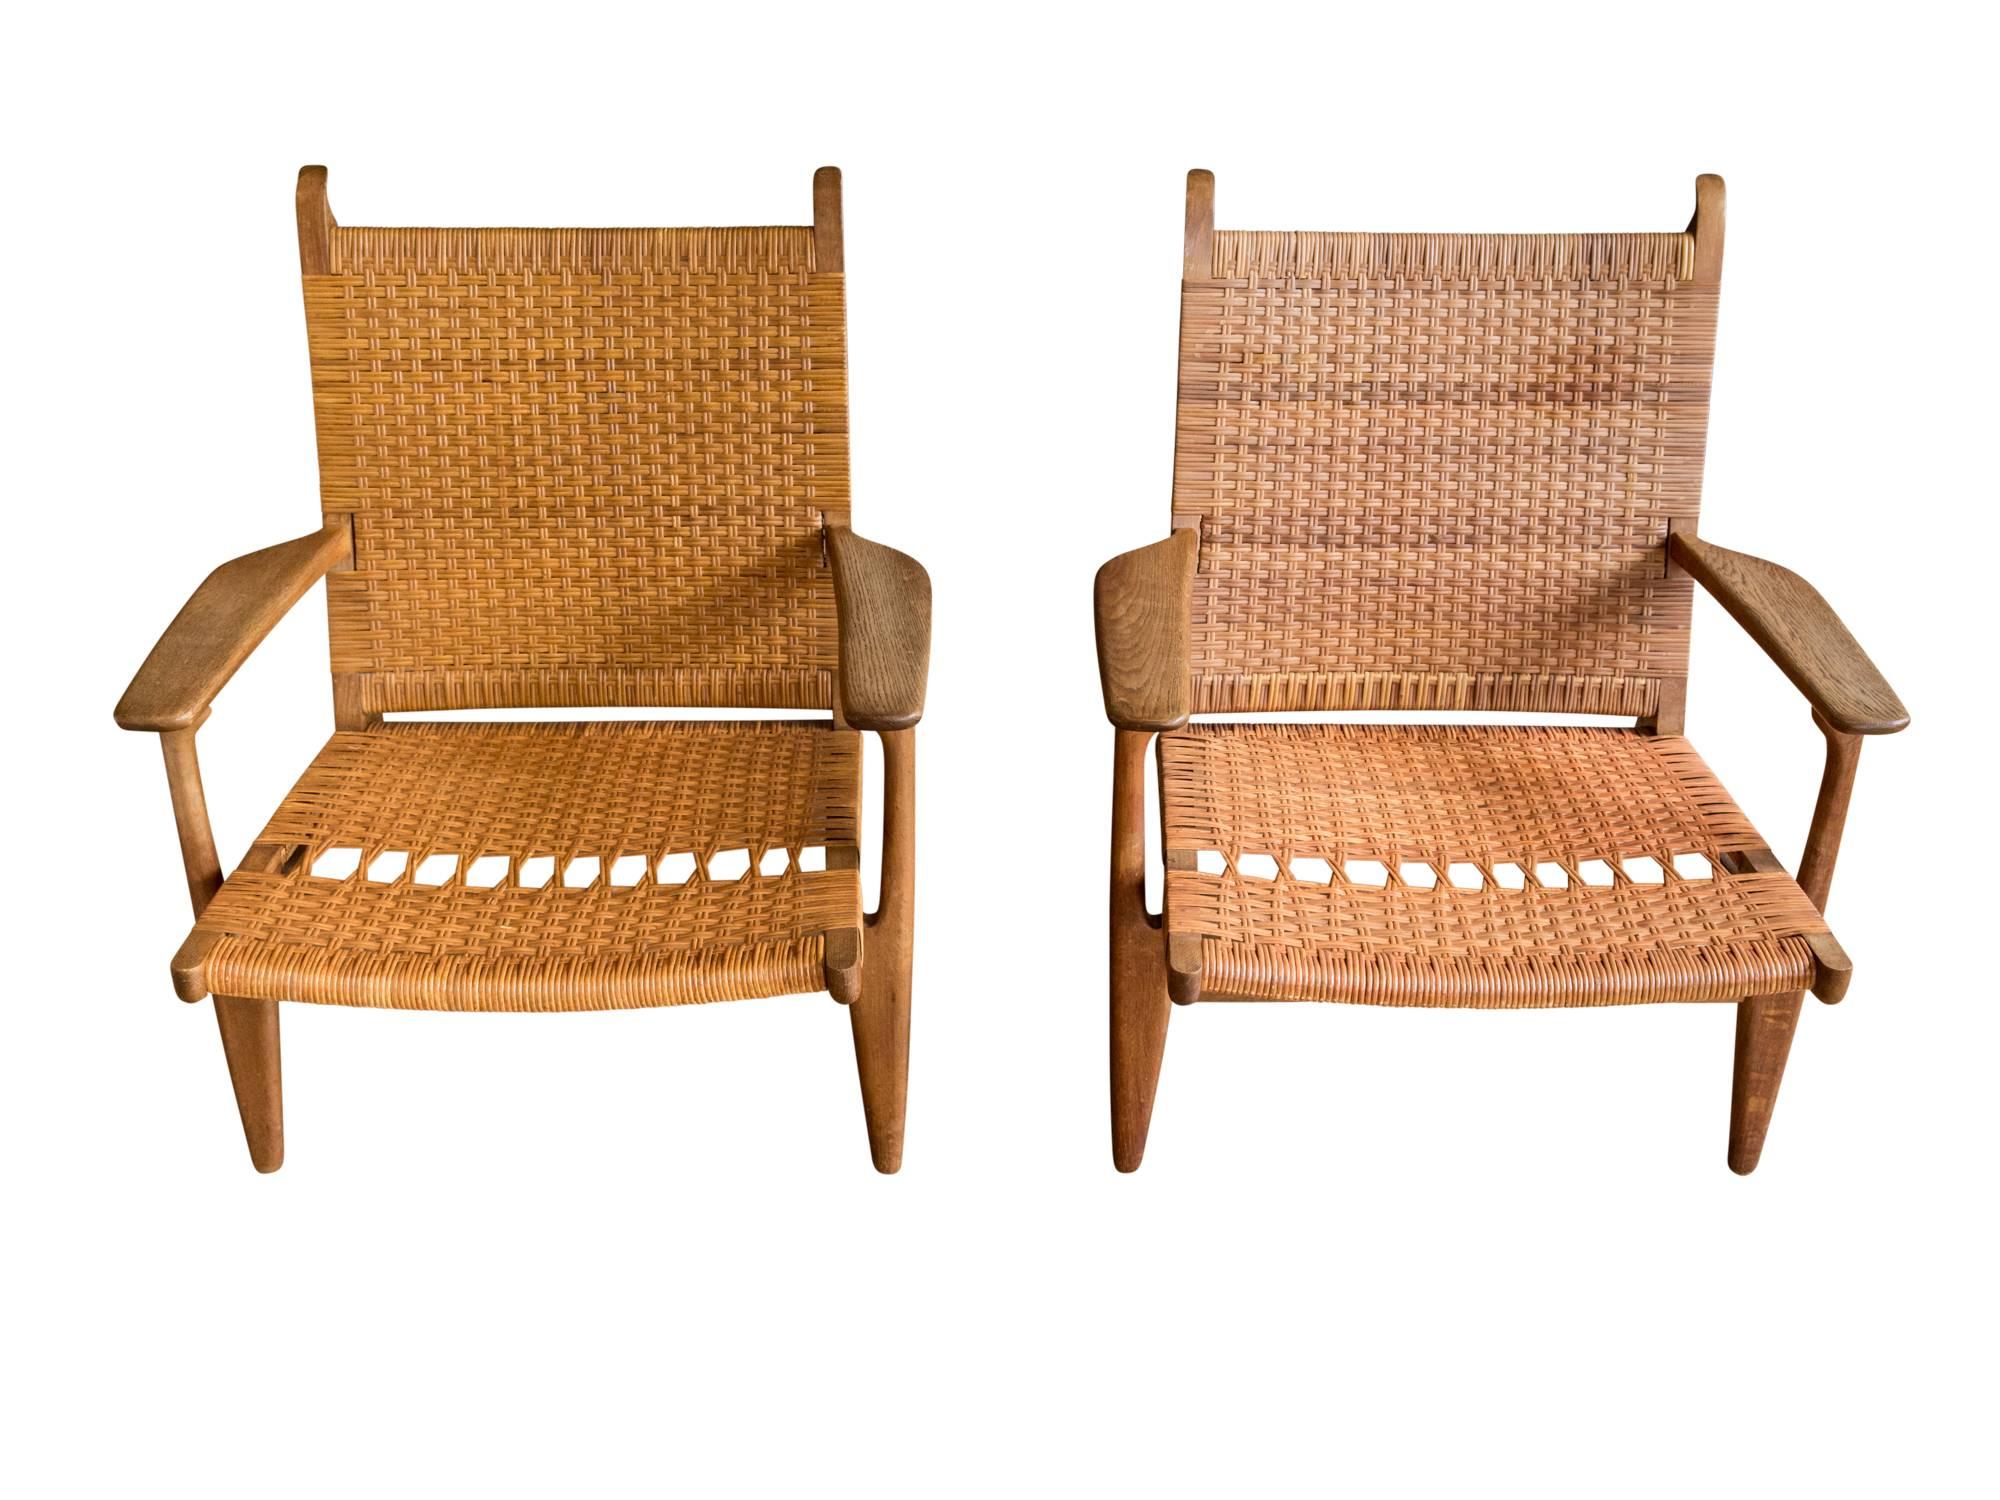 A handsome set of model CH-27 lounge chairs by Hans J. Wegner for Carl Hansen & Son. Designed in 1949, this set dates to the 1950s. Featuring solid oak frames with woven cane seats and backs. Paddle arms and elegantly splayed back legs add to